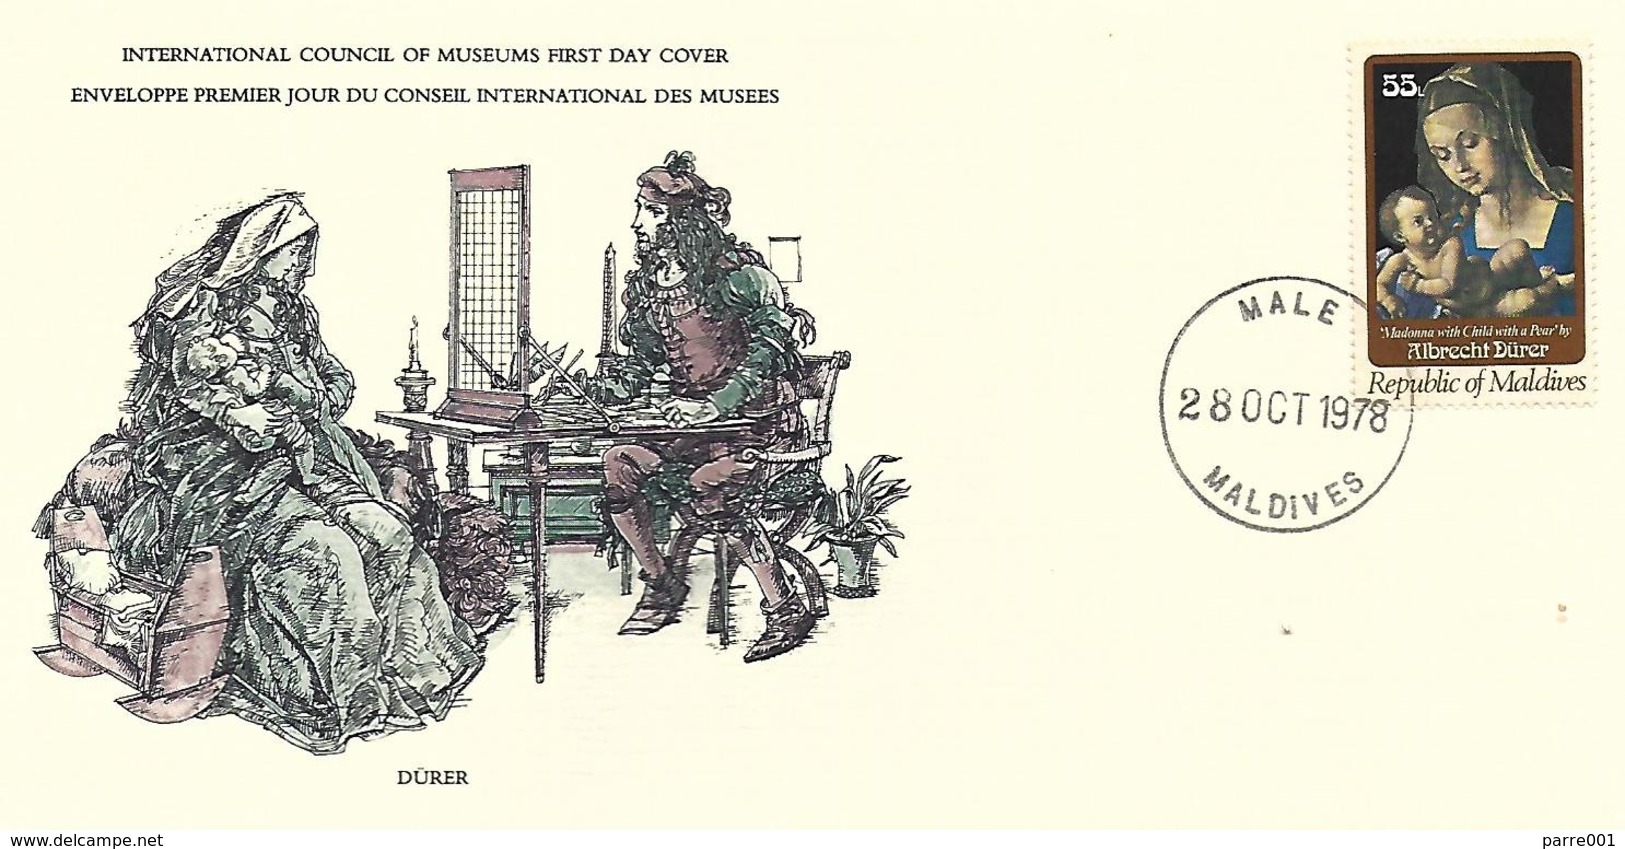 Maldives 1978 Male Albrecht Dürer Madonna With Child And Pear Painting FDC Cover - Madonna